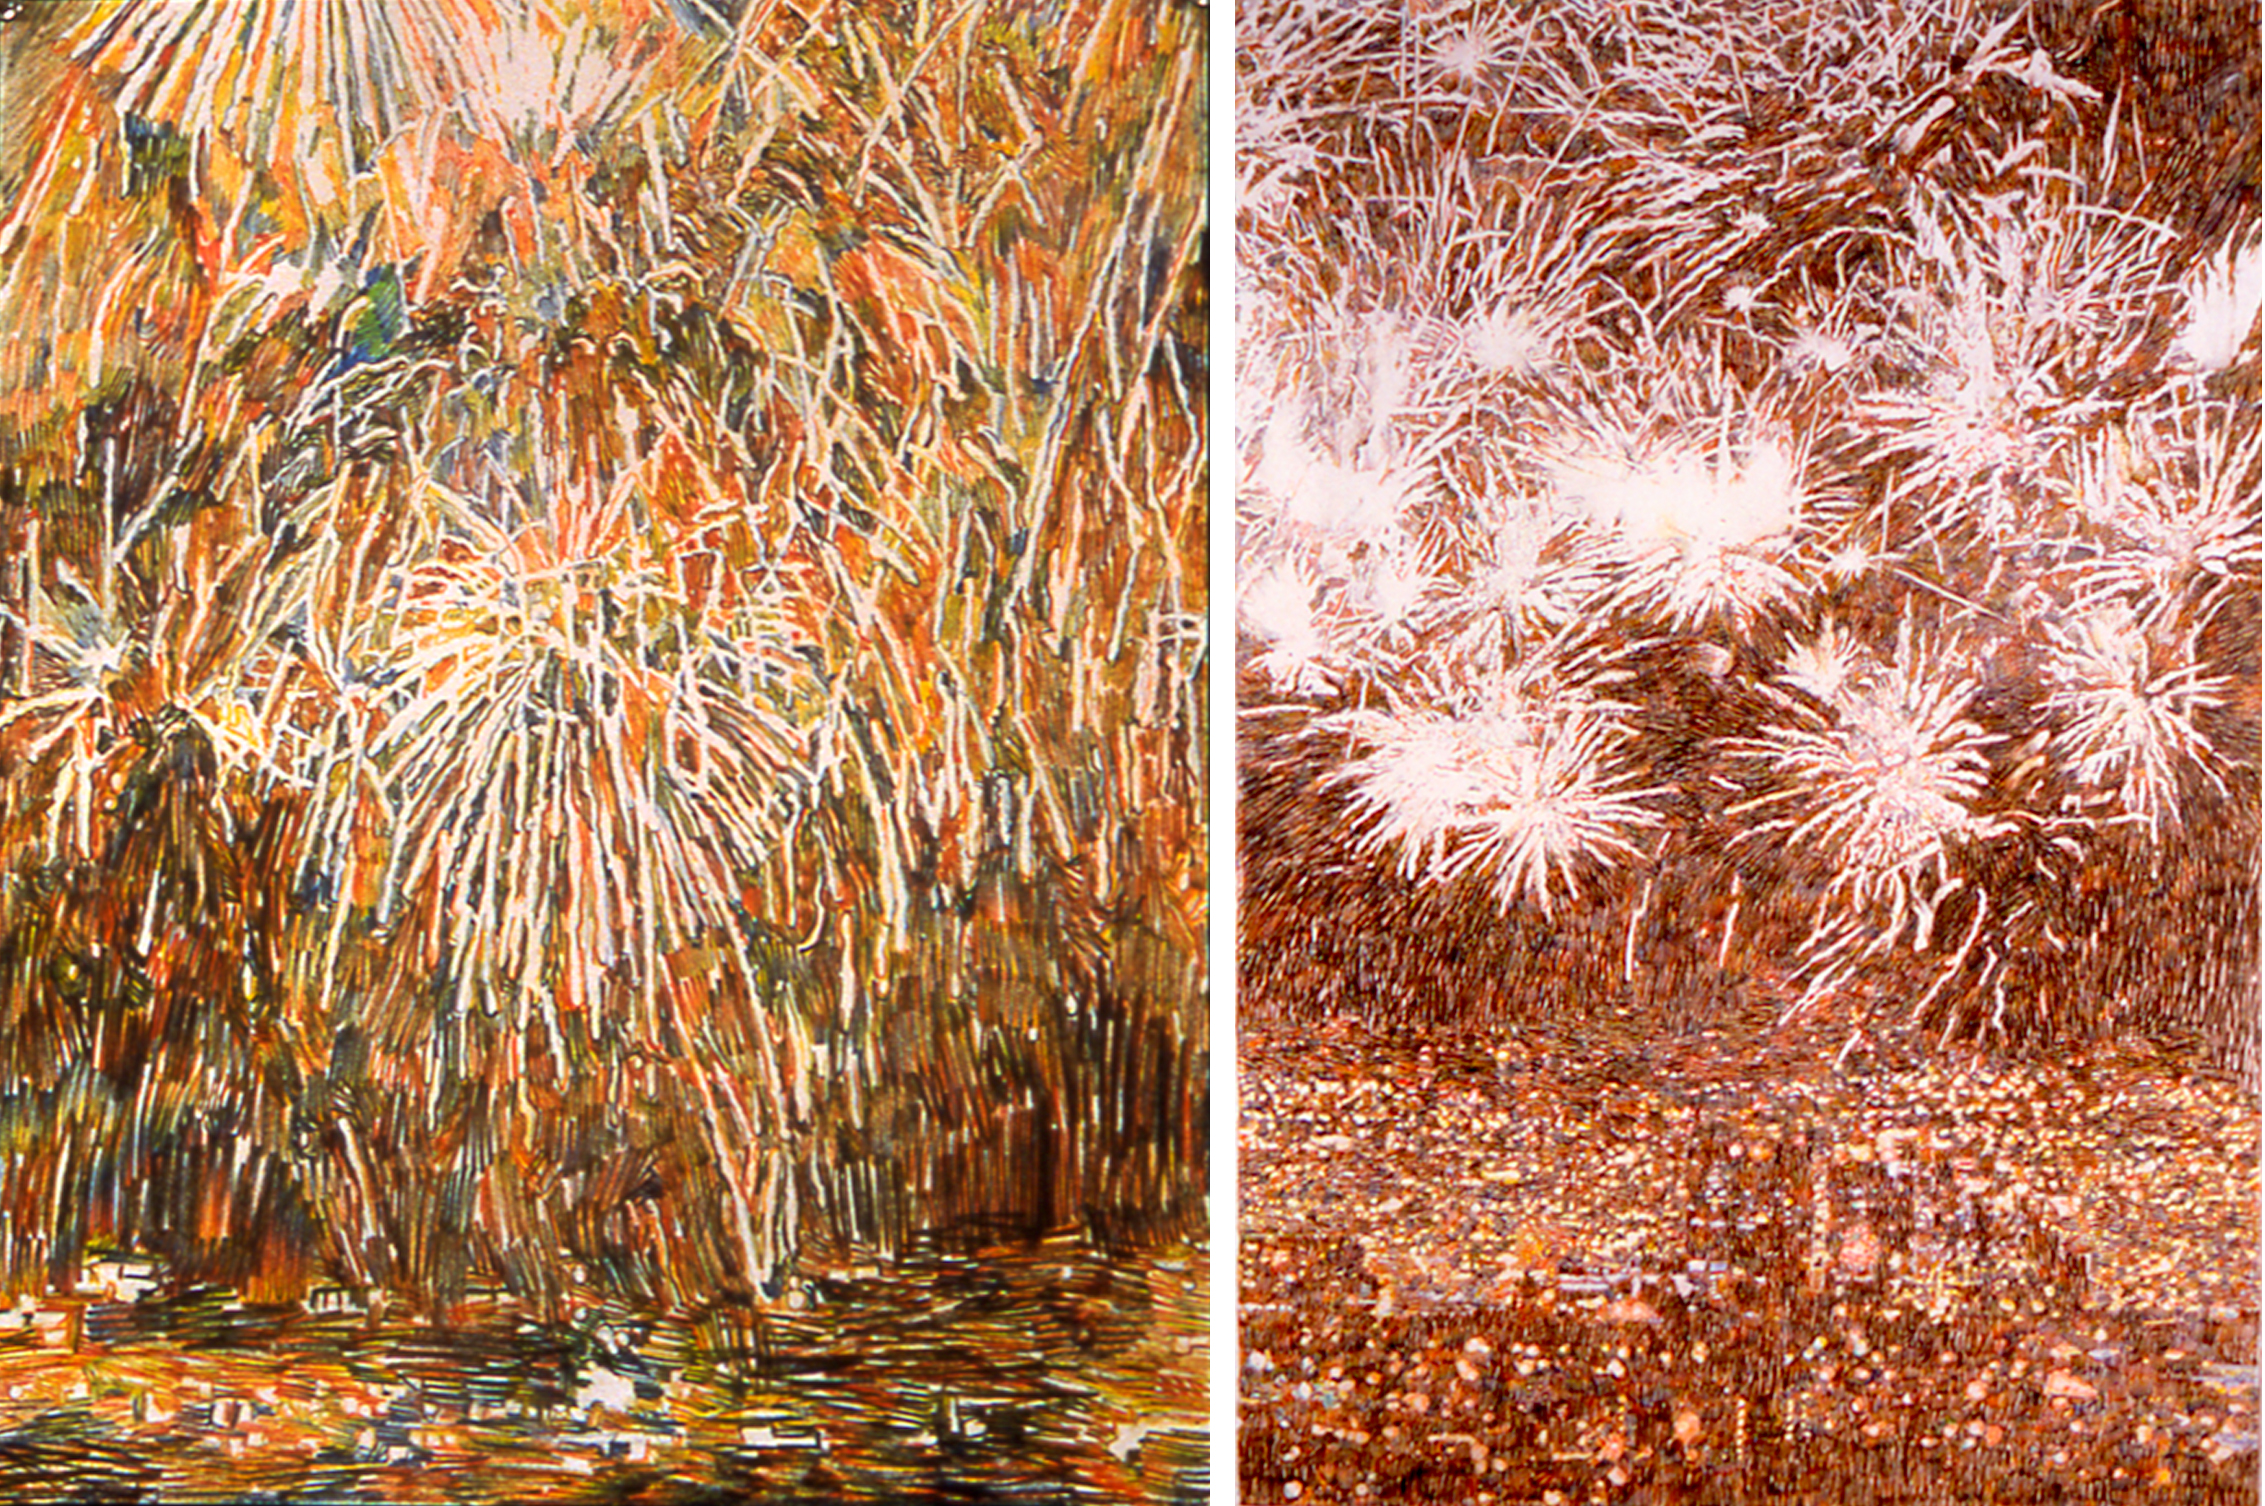 Fireworks 1, Pyrotechnics (Petardes), 2003, Quattro Colored Pencil on Paper, 59 3/4 x 40 7/8 inches, Permanent Collection of the Yale Gallery of Art 